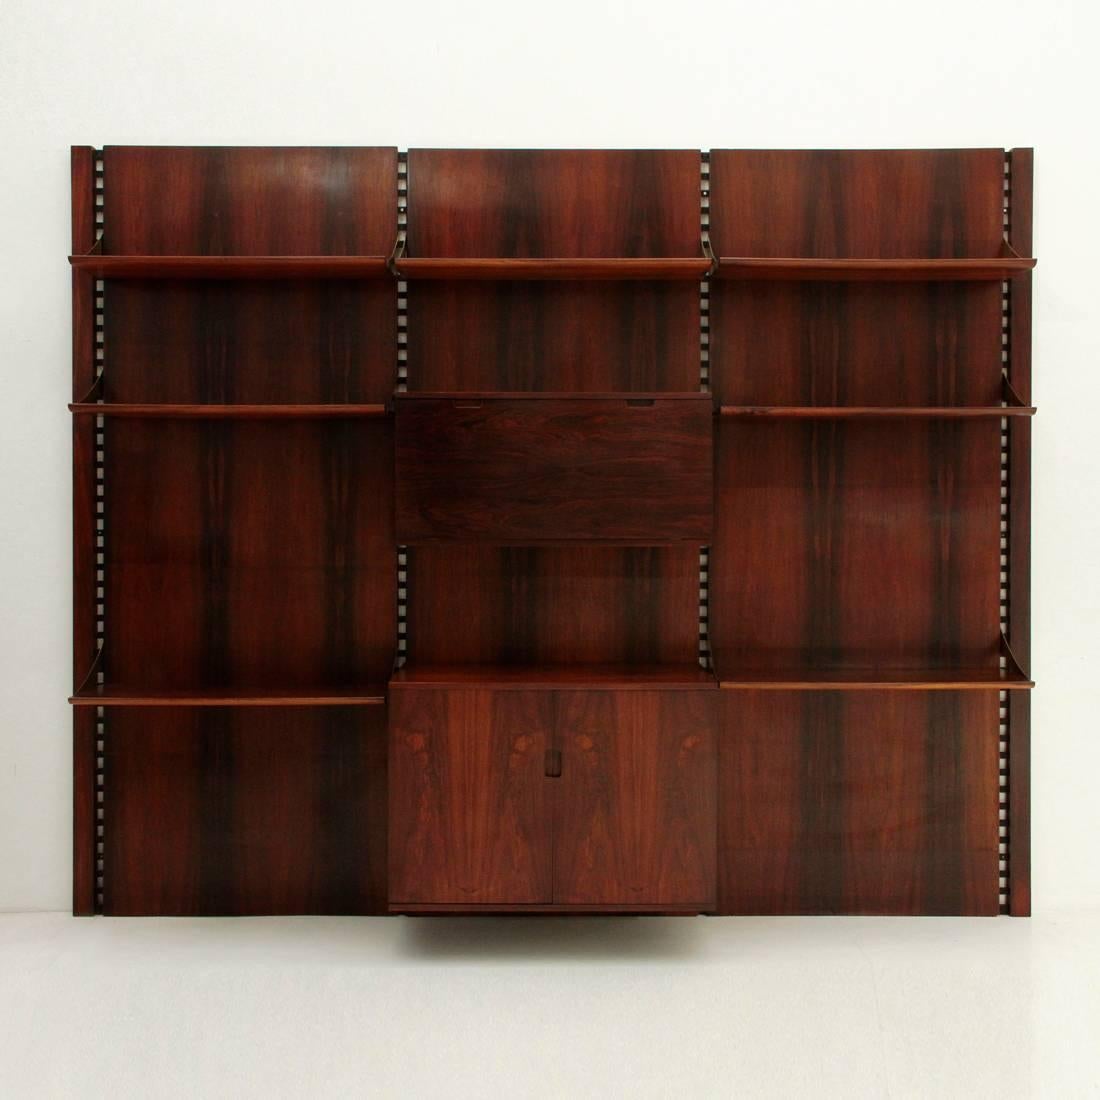 Library produced by Mobilia in the 1960s.
Black varnished iron stands, back panels and storage systems in rosewood veneered wood, burnished brass anchor hooks and embossed handles.
Seven shelves with tapered edges, a compartment with door opening,